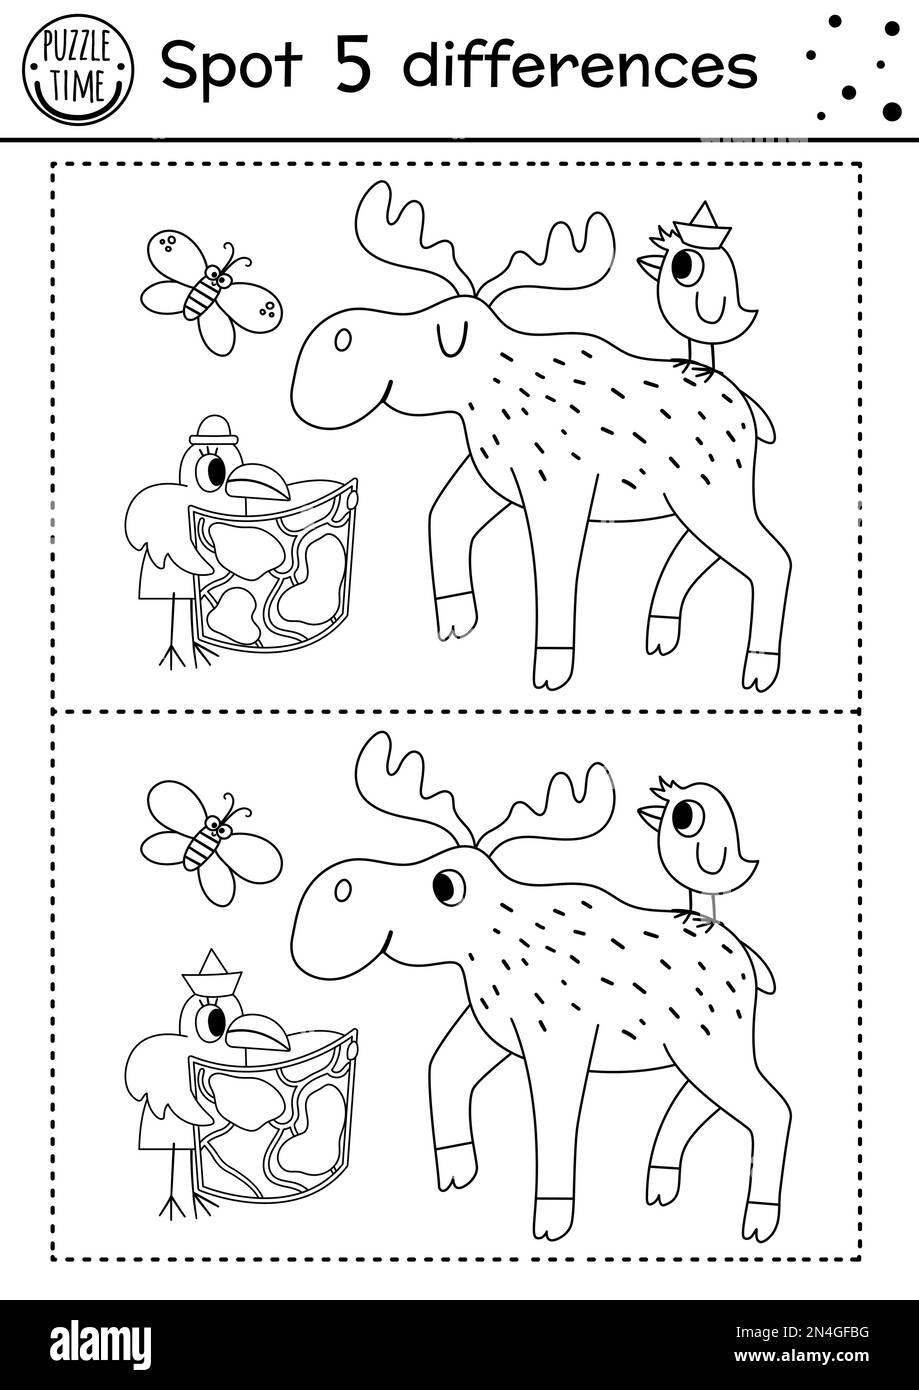 Forest find differences game for children. Black and white educational activity and coloring page with moose and birds. Summer camp or woodland printa Stock Vector